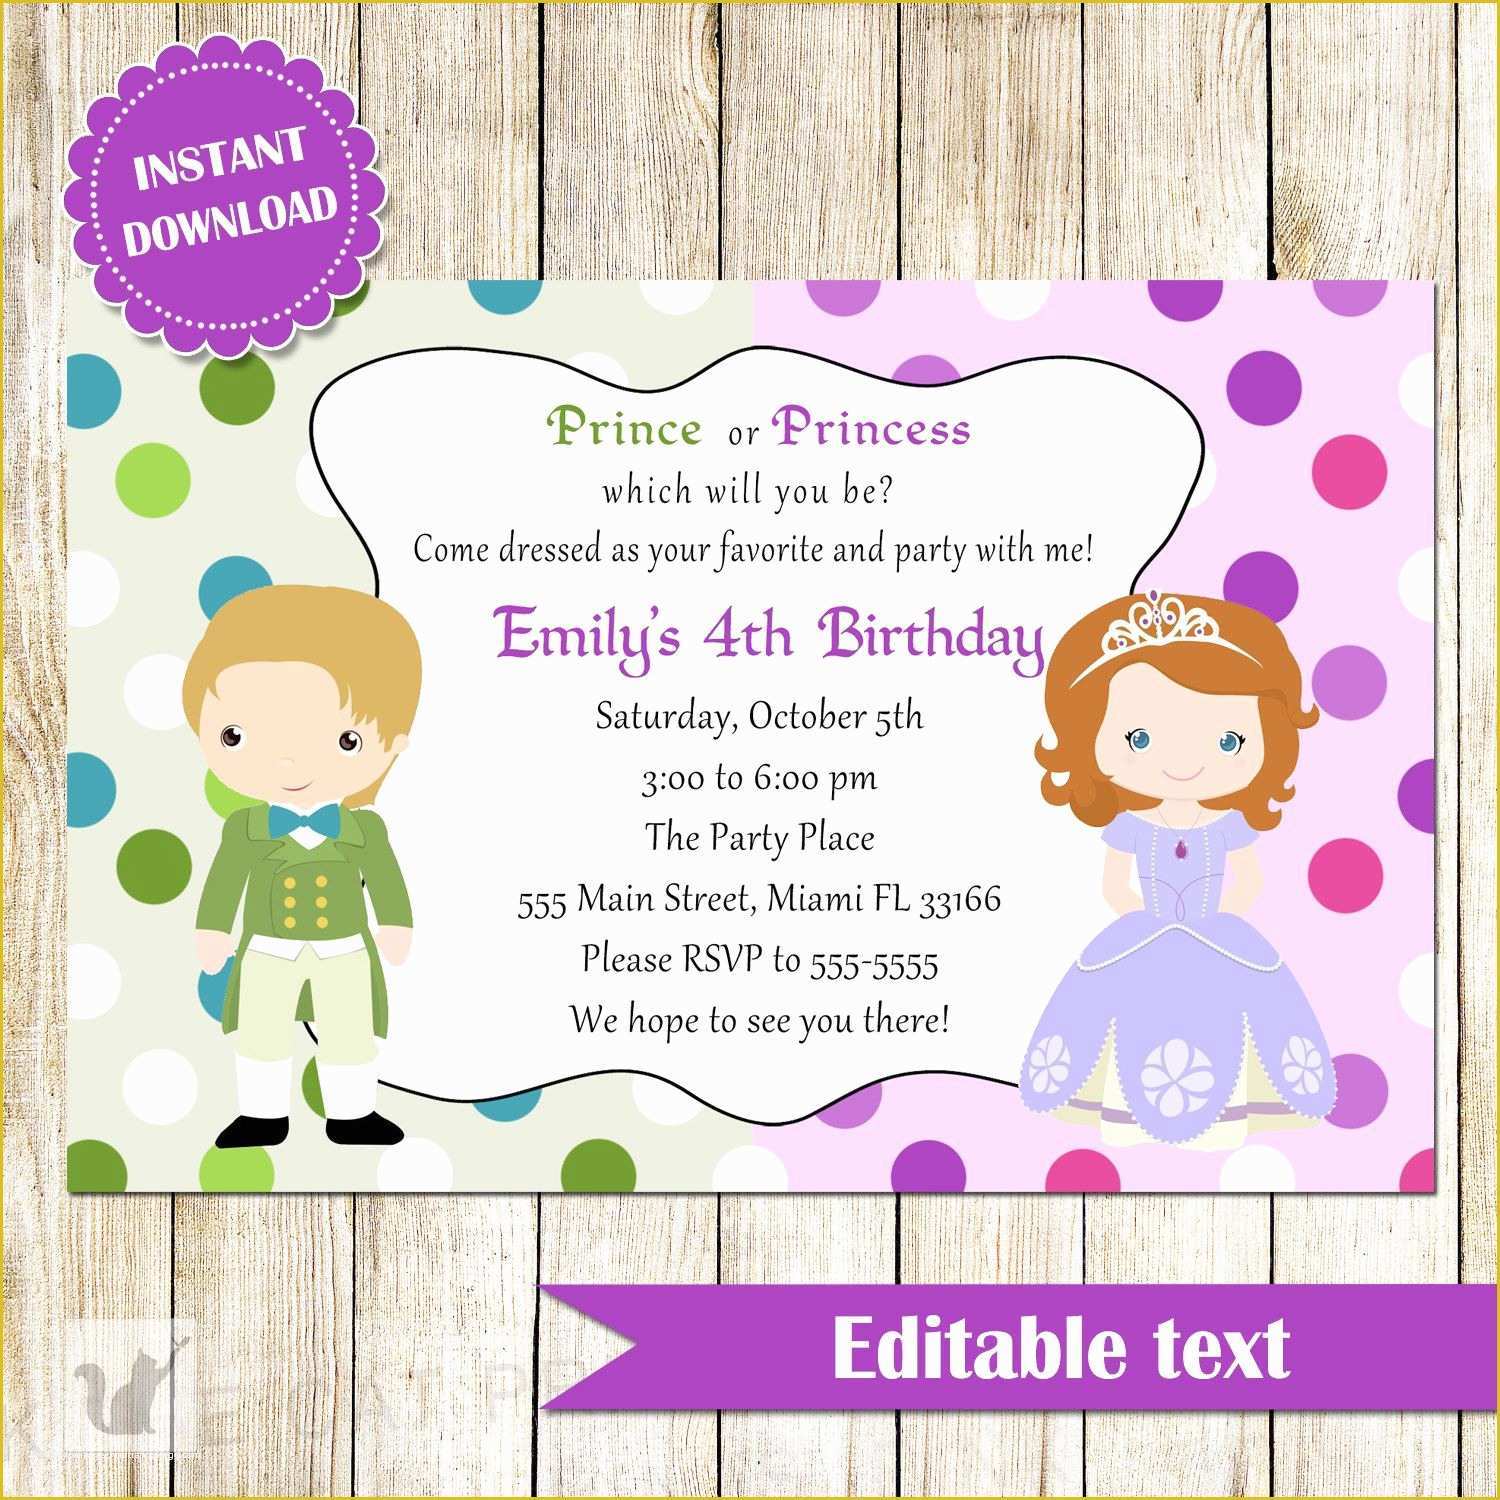 Birthday Party Invitations for Kids Free Templates Of Childrens Birthday Party Invites toddler Birthday Party